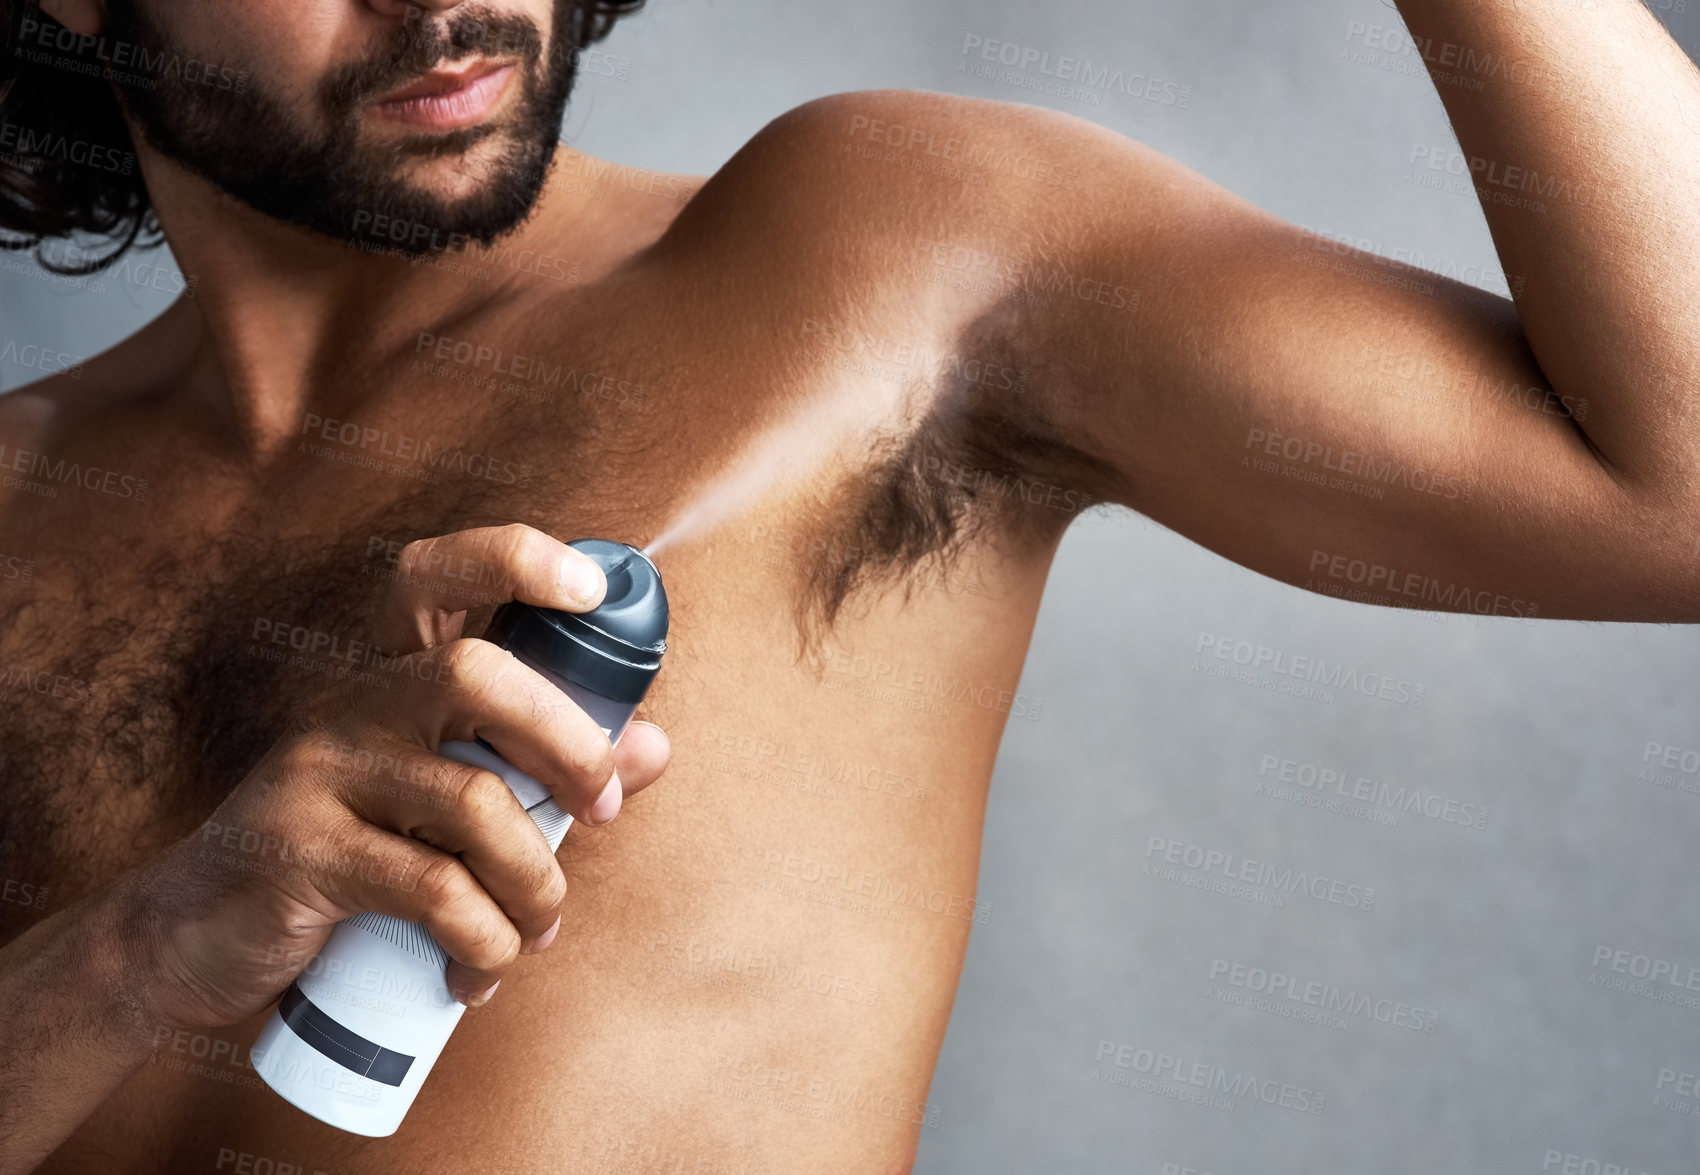 Buy stock photo Studio shot of a handsome young man applying deodorant against a grey background